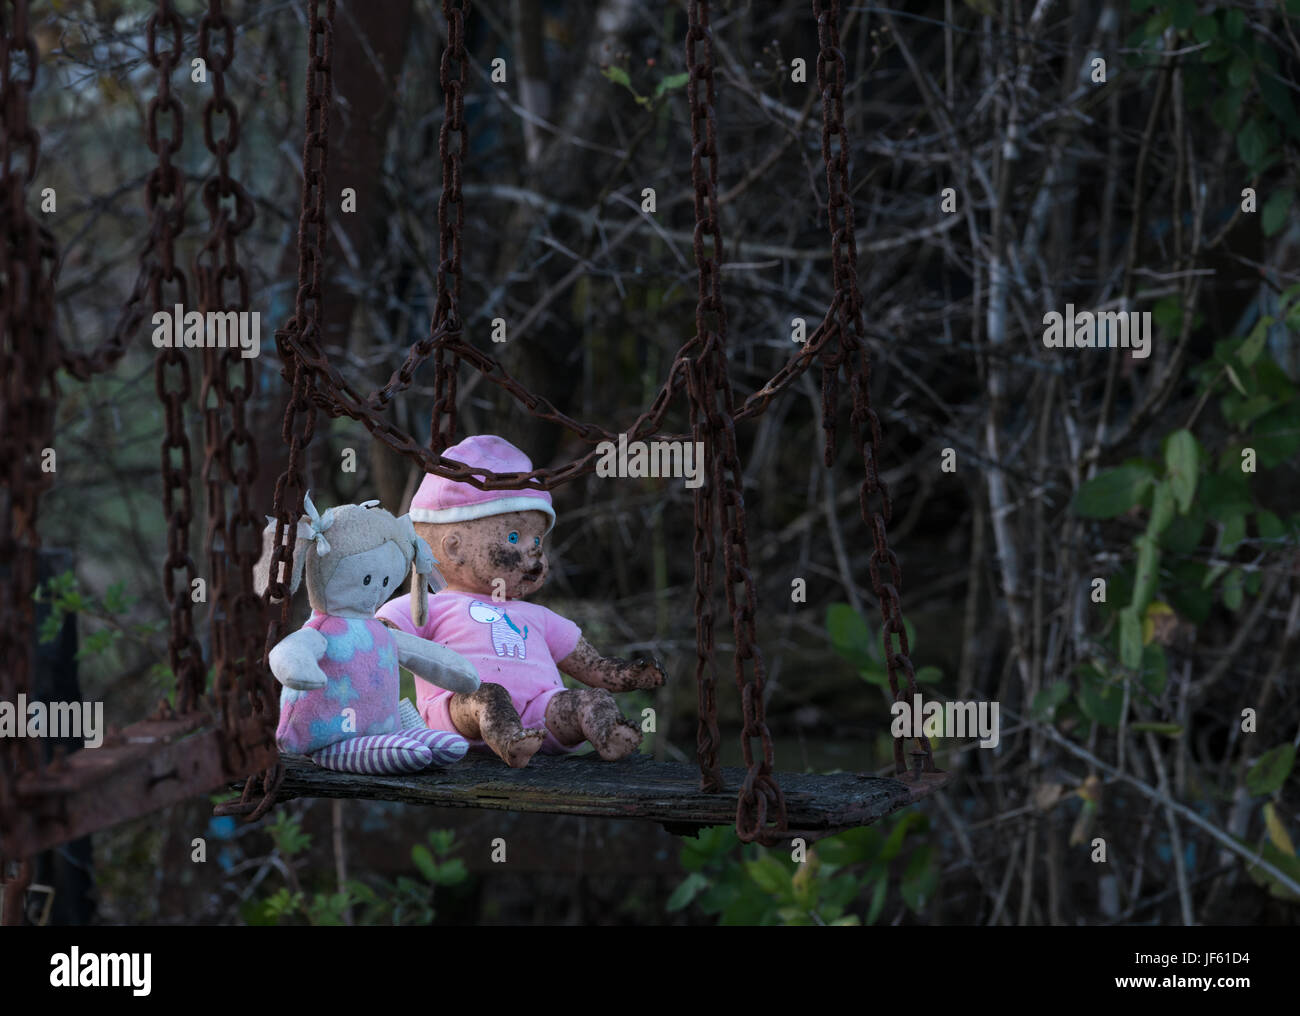 Abandoned childs doll and soft toy on swing Stock Photo